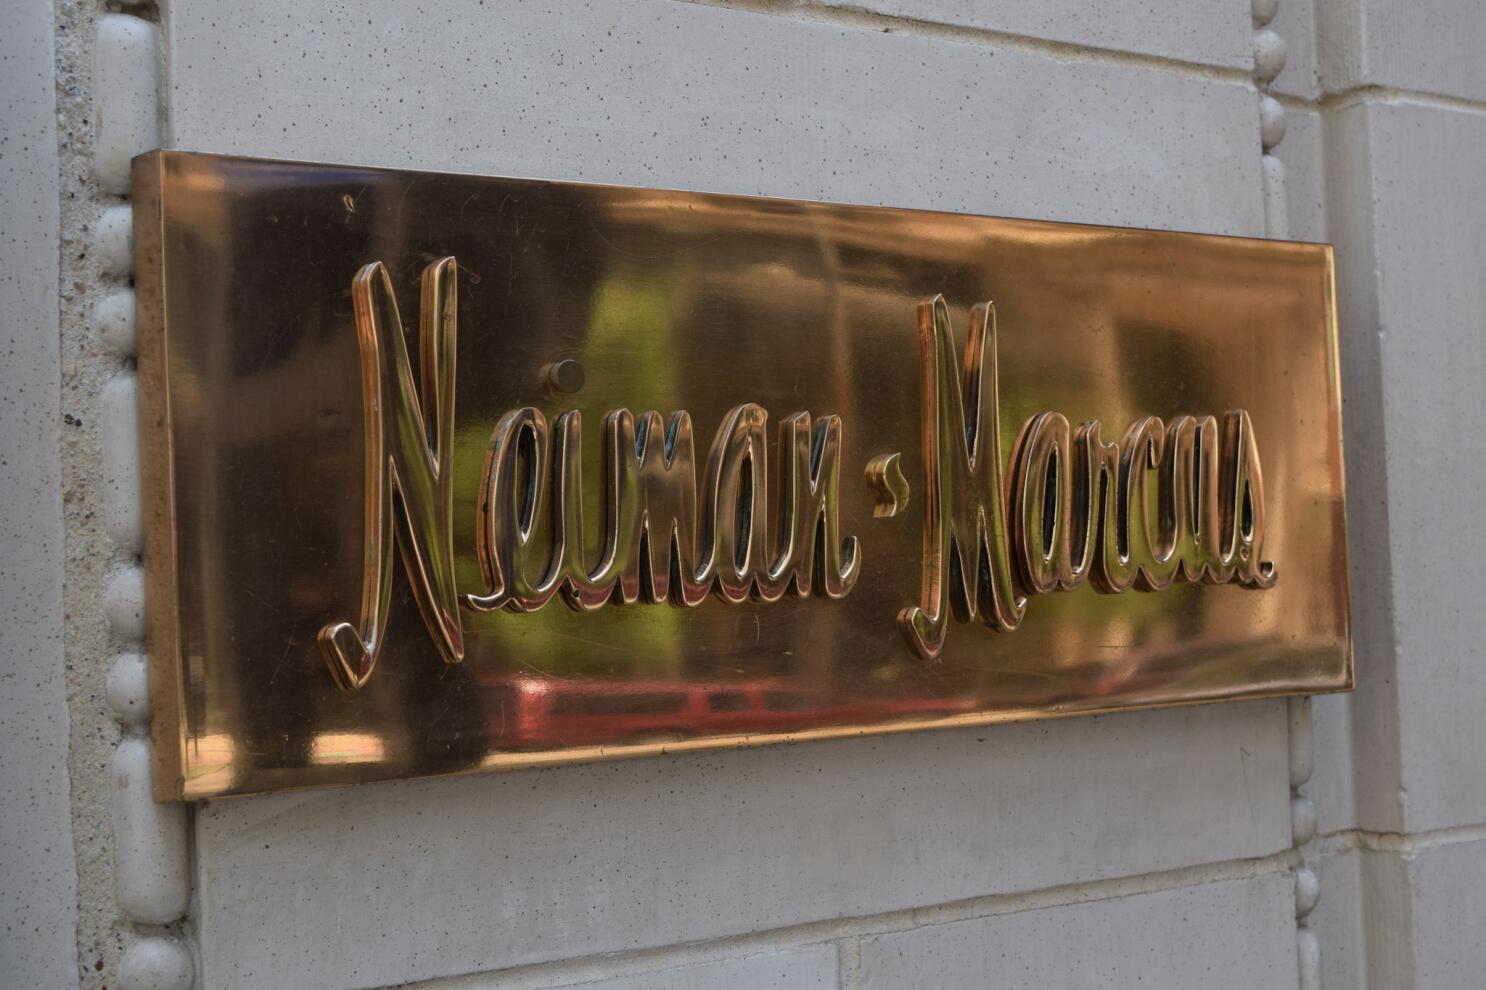 Neiman Marcus has decided which Last Call stores will remain open